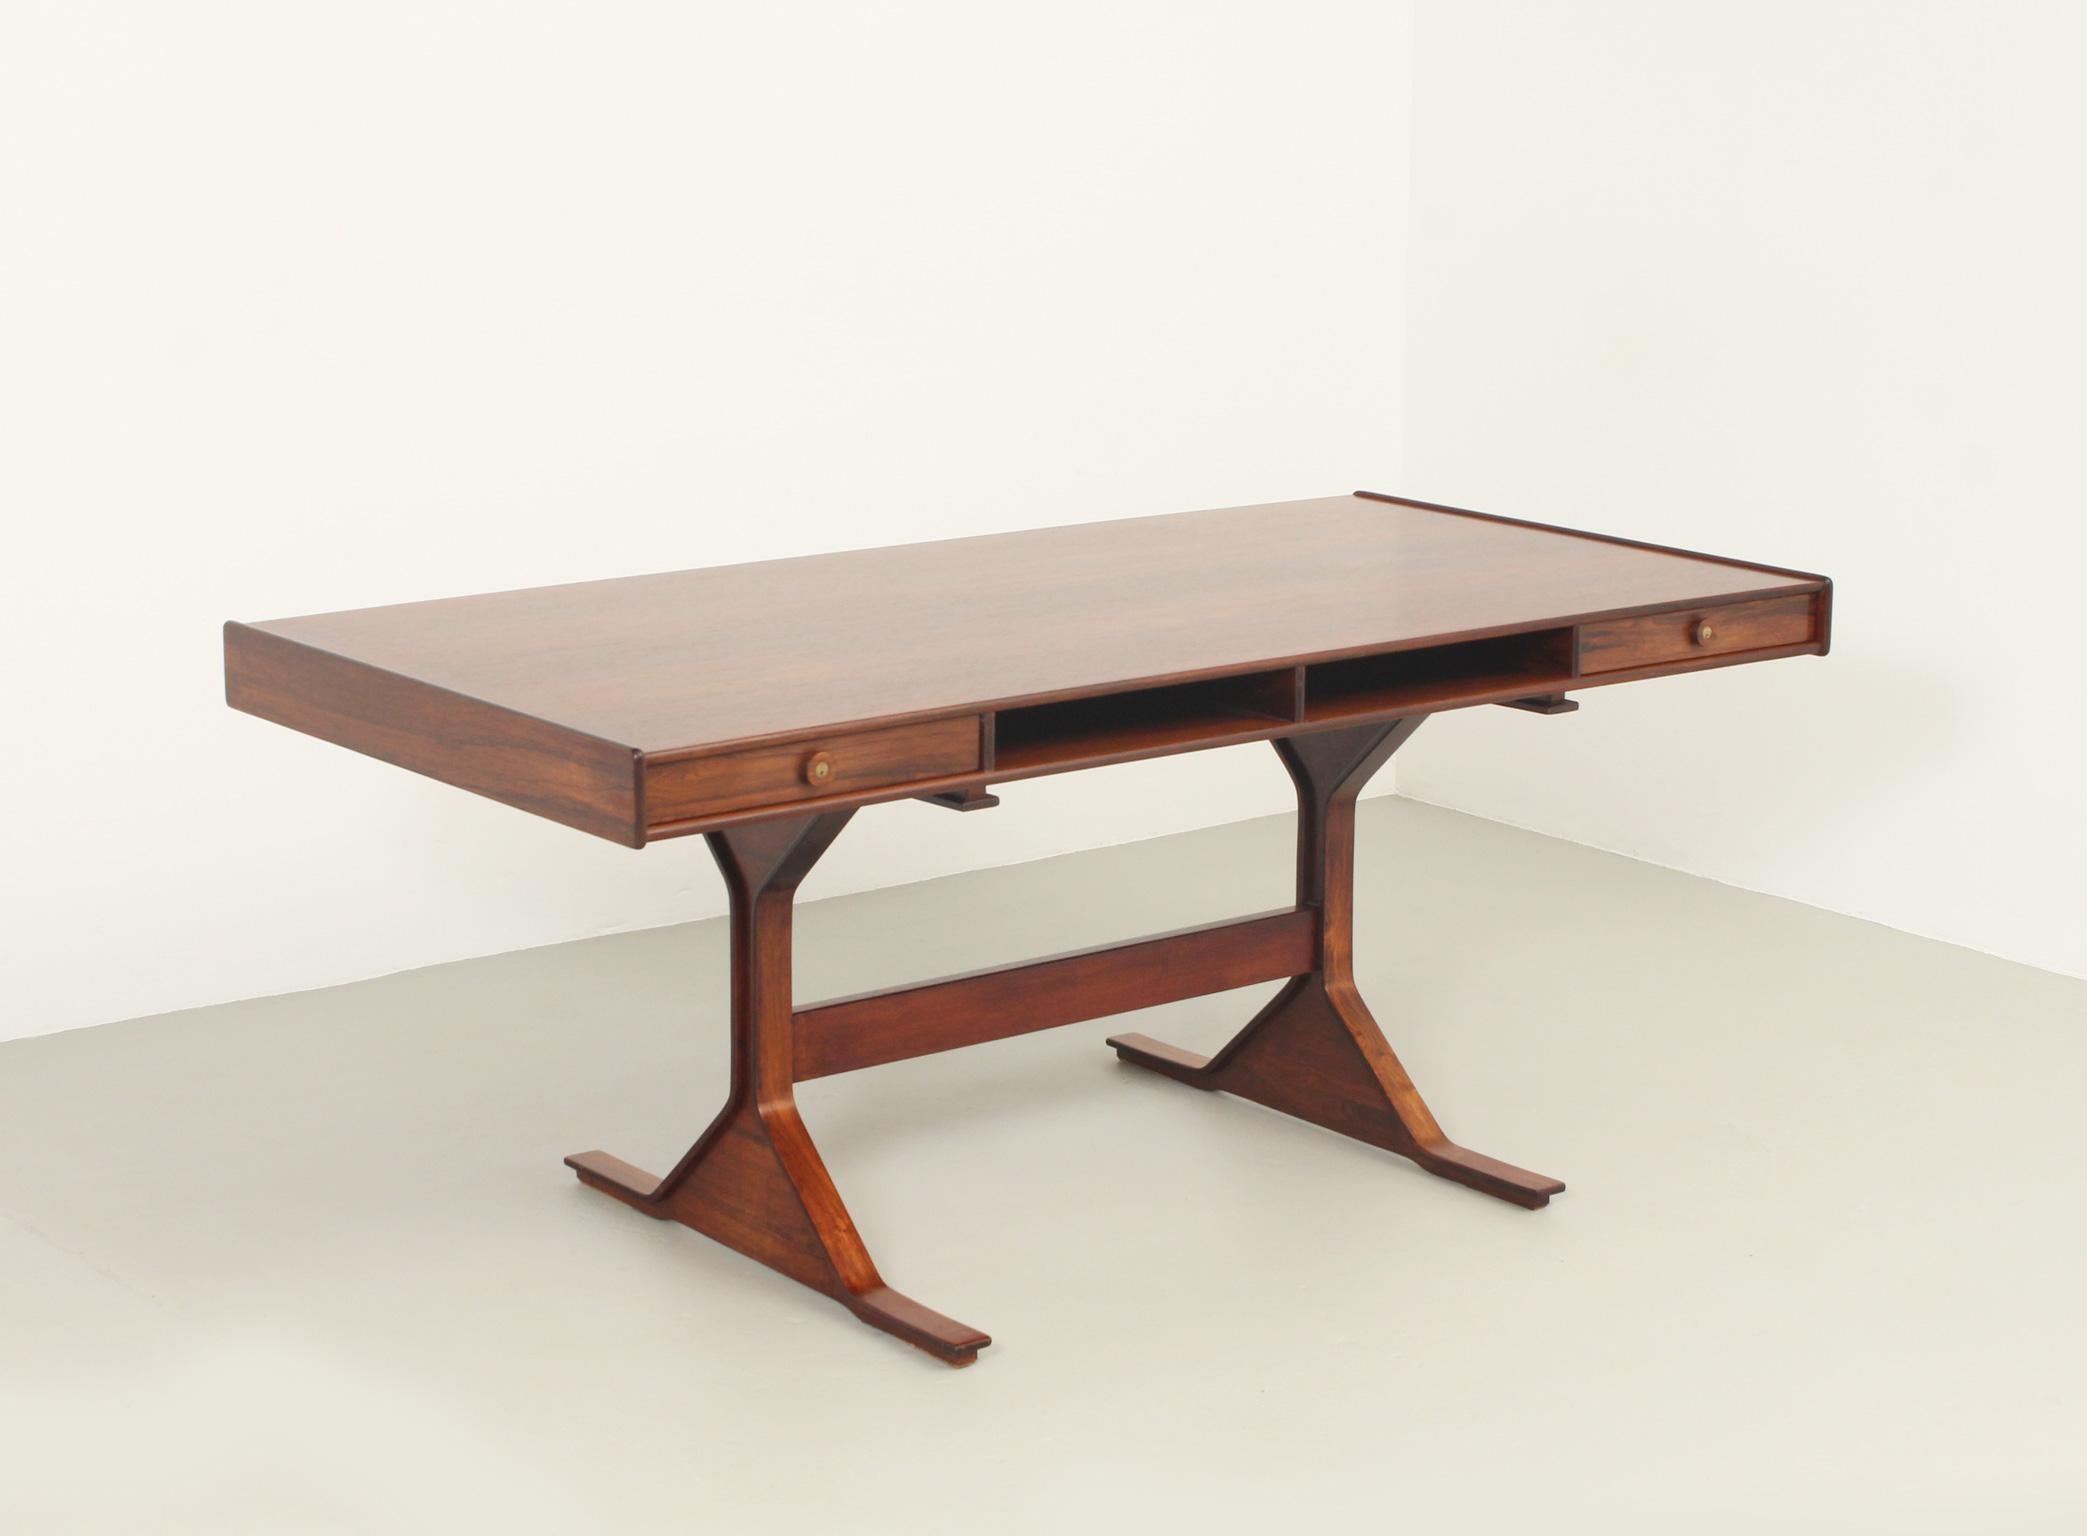 Desk designed by Gianfranco Frattini in 1956 for Bernini, Italy. Two drawers and two open spaces in the front side and another four open spaces in the back side. Signed with Bernini logo.